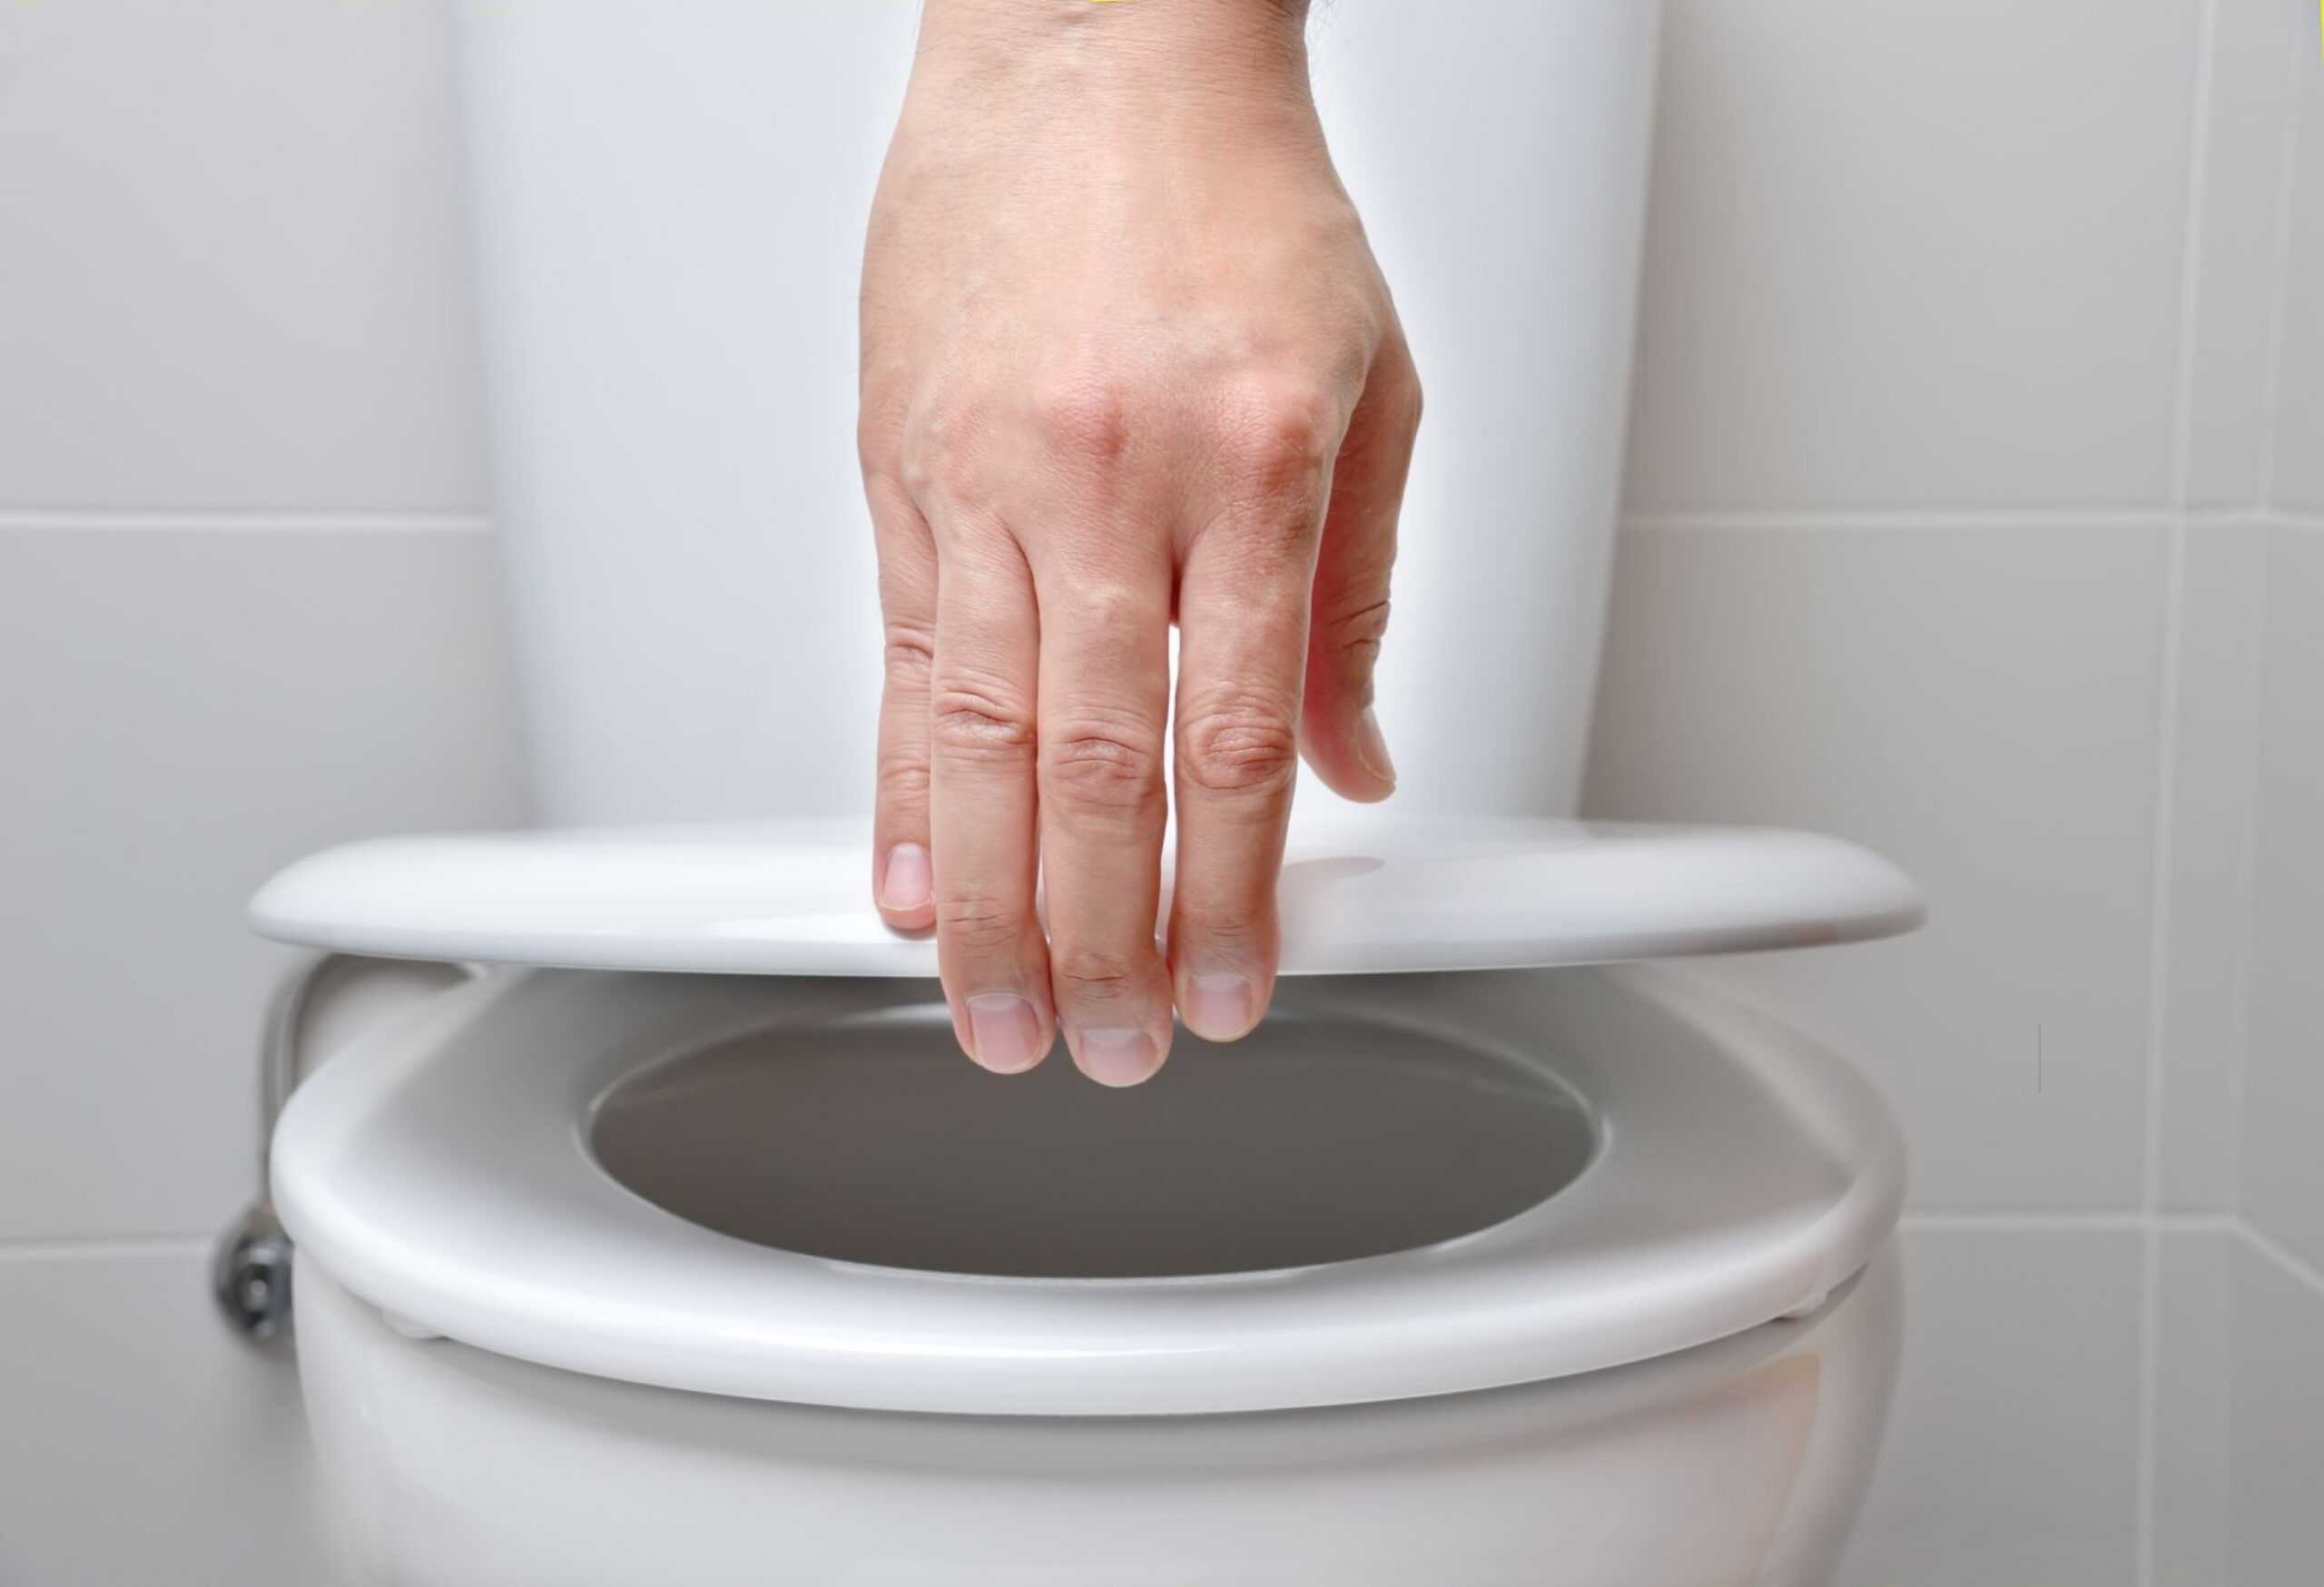 Best Way to Clean and Disinfect Toilet Tidyhere Image of a Hand Closing Toilet Lid